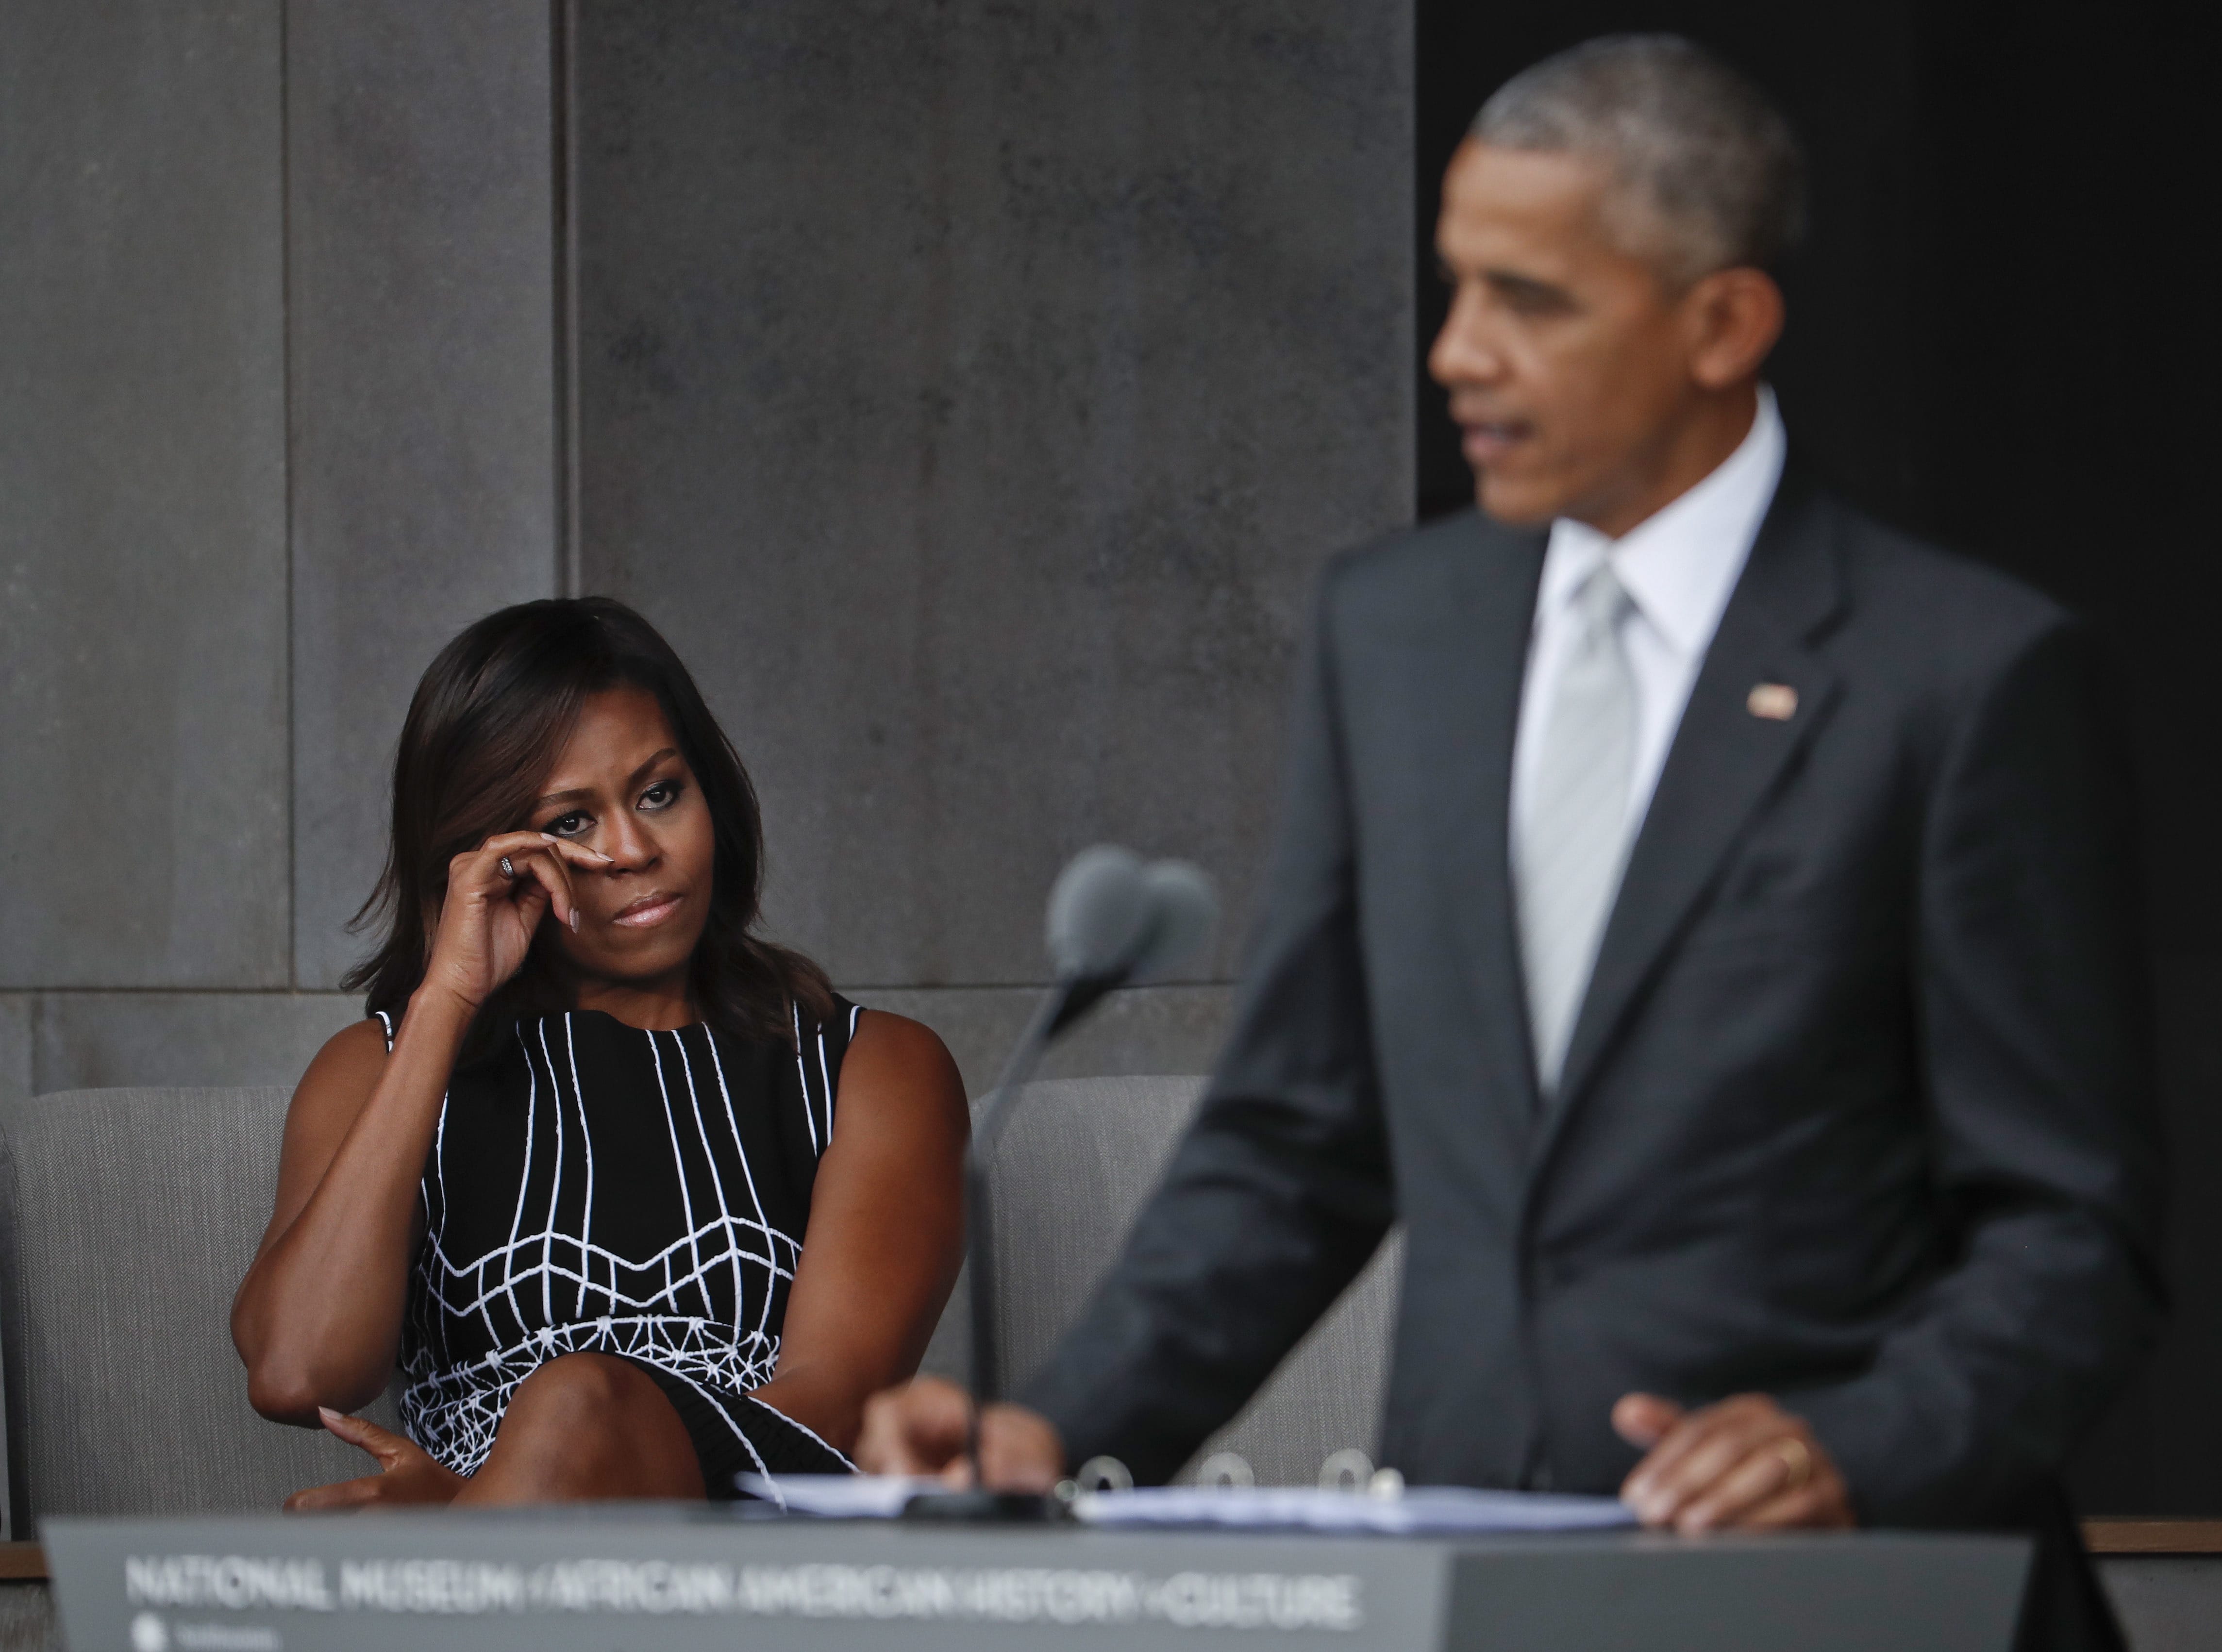 First lady Michelle Obama wipes her eyes as she listens to her husband, President Barack Obama, speak at the dedication ceremony for the Smithsonian Museum of African American History and Culture on the National Mall in Washington, Saturday, Sept. 24, 2016.